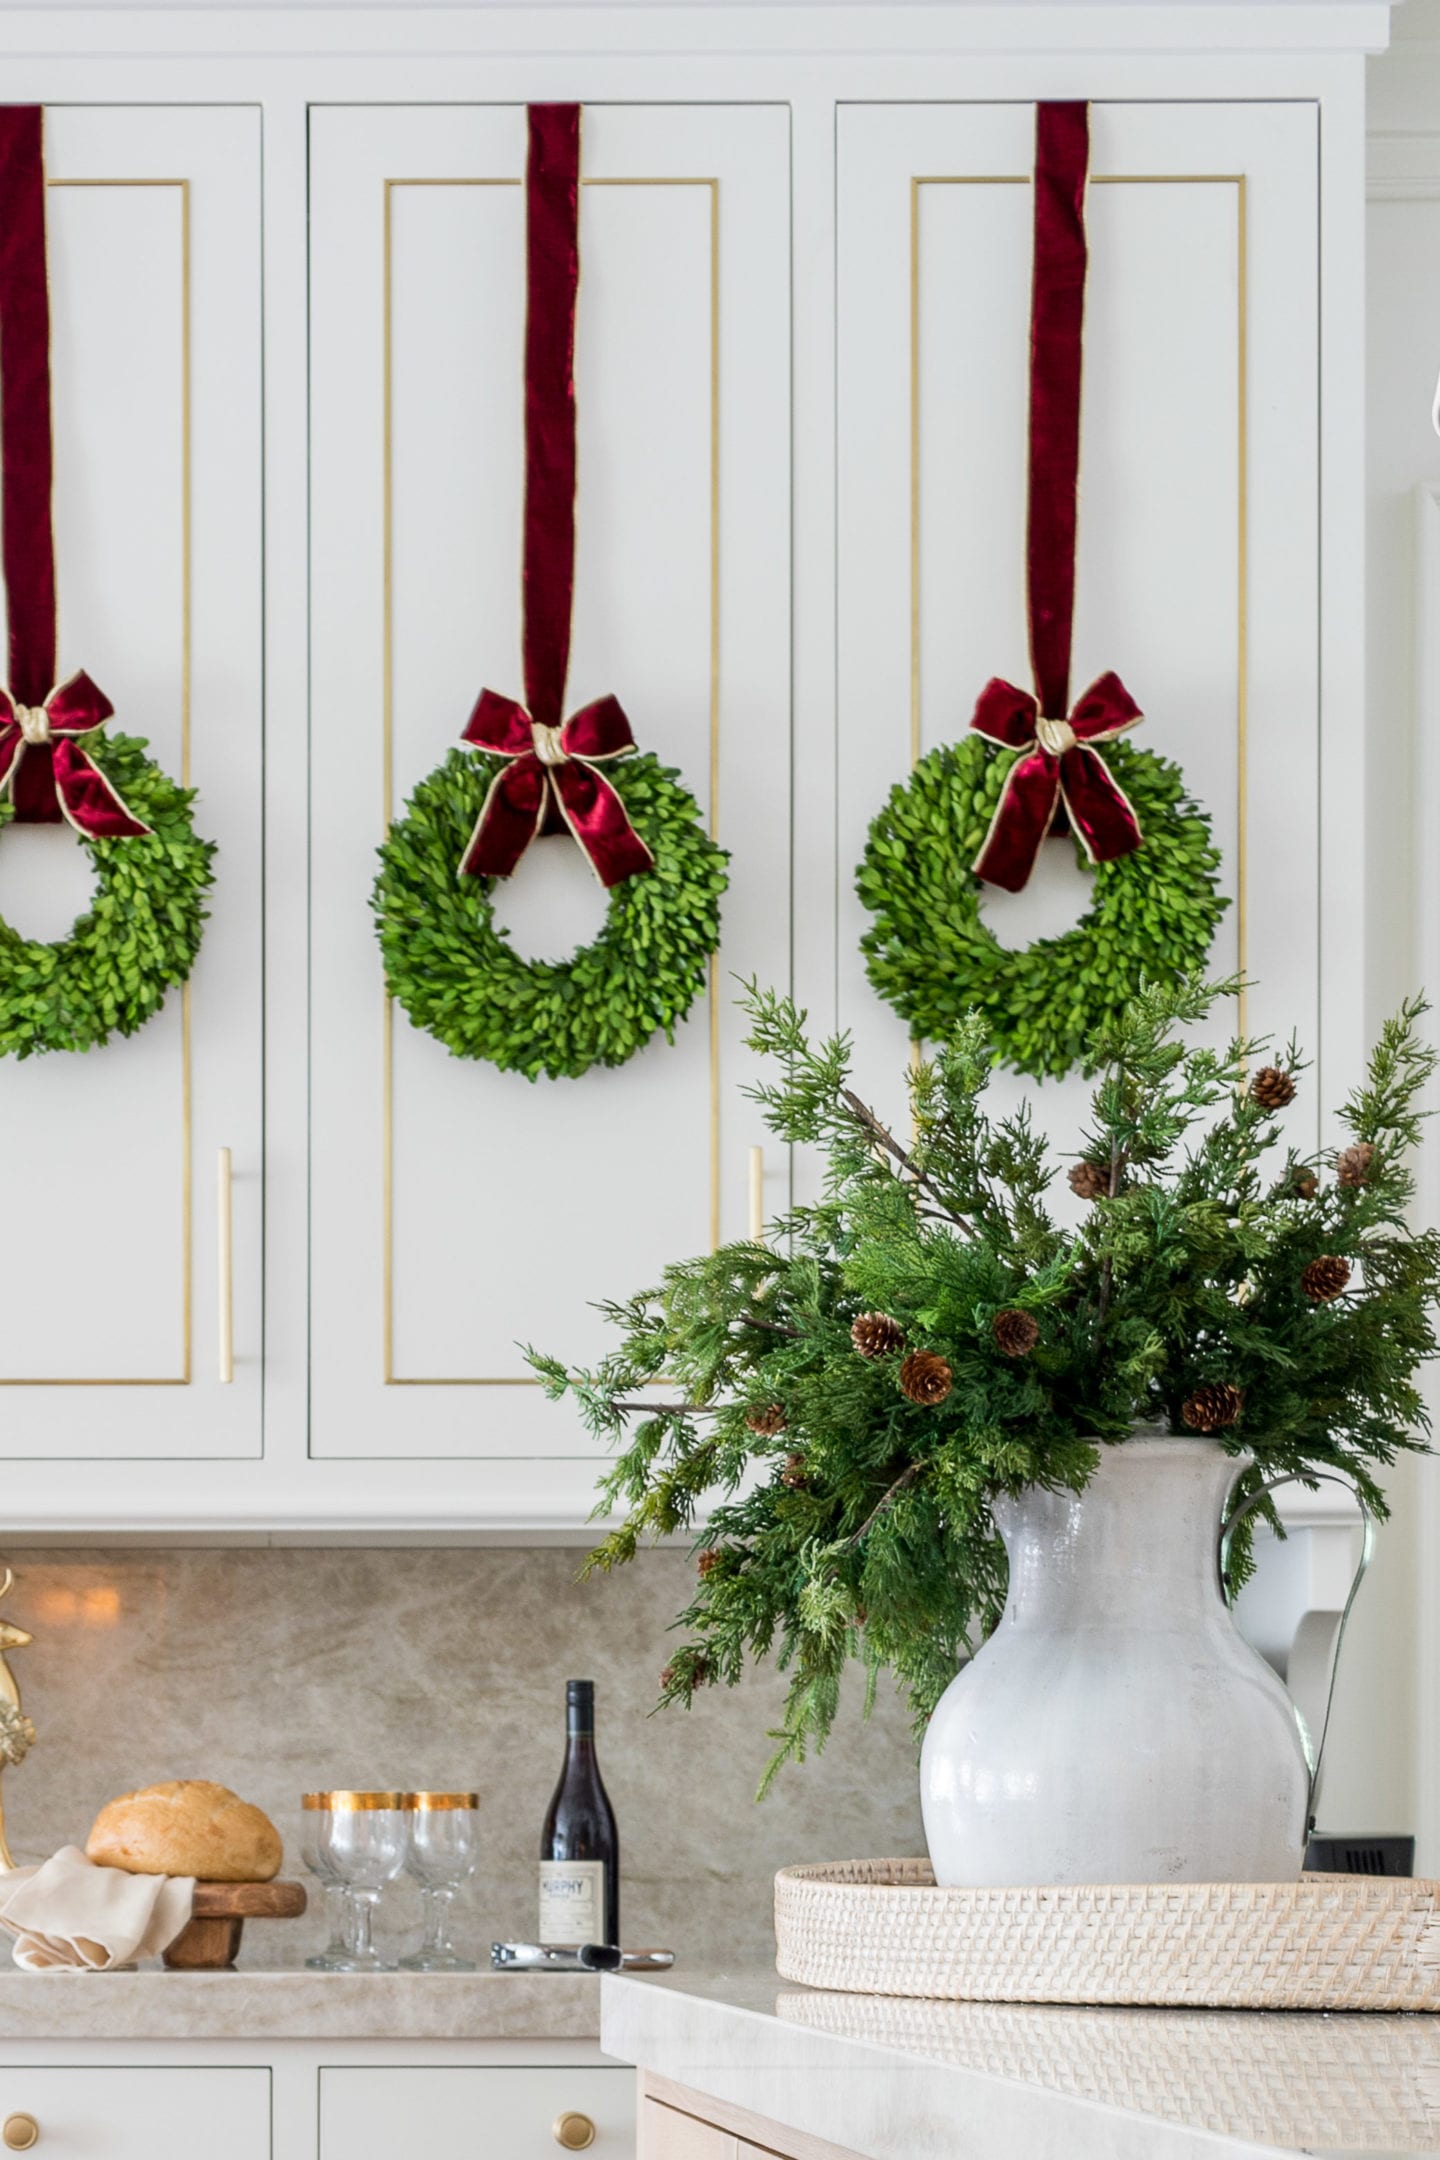 Fresh greenery in the kitchen is beautiful, but who has time these days? I discovered the best faux greenery garland. I mixed faux cedar garland to make a perfectly imperfect farmhouse garland feel. The best faux cedar garland is so life-like it feels almost damp feel! A beautiful look that will last all holiday long!